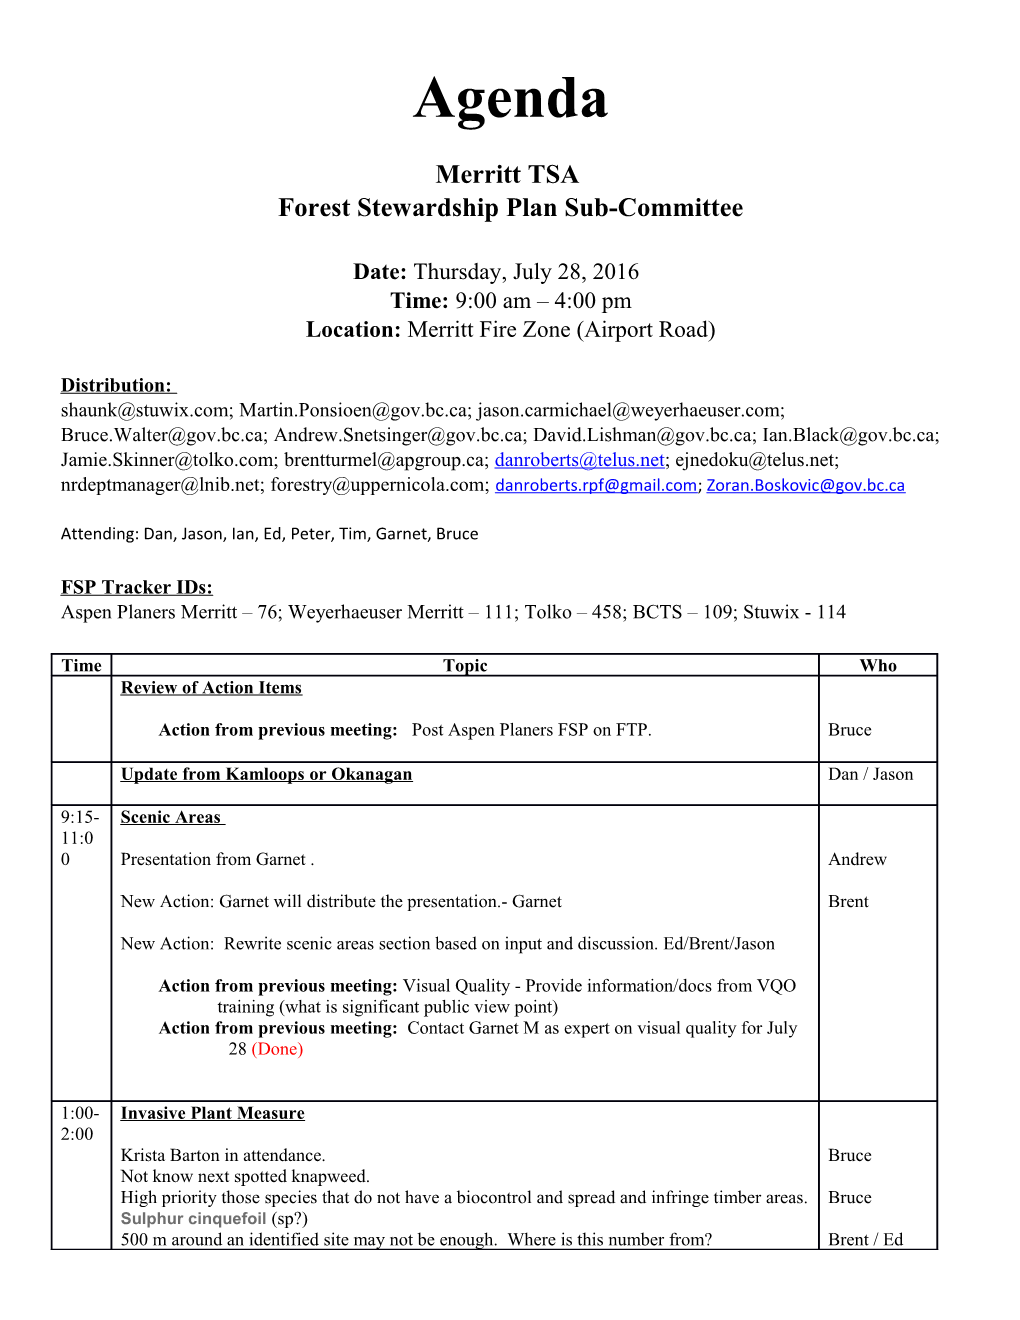 Forest Stewardship Plan Sub-Committee